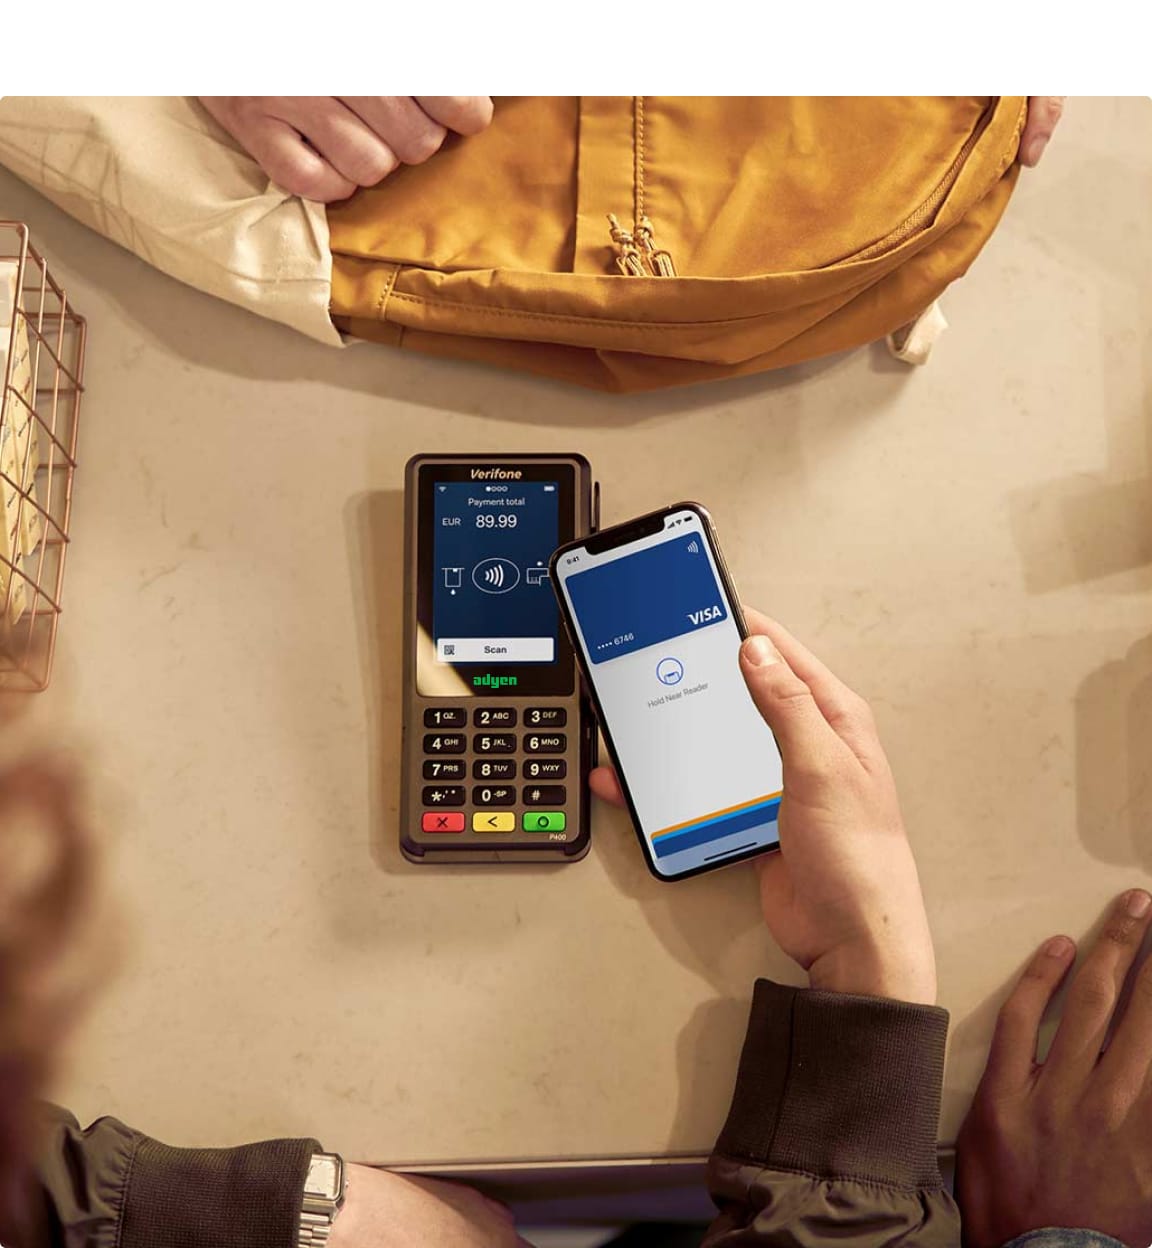 Point of sale payment terminal and digital wallet